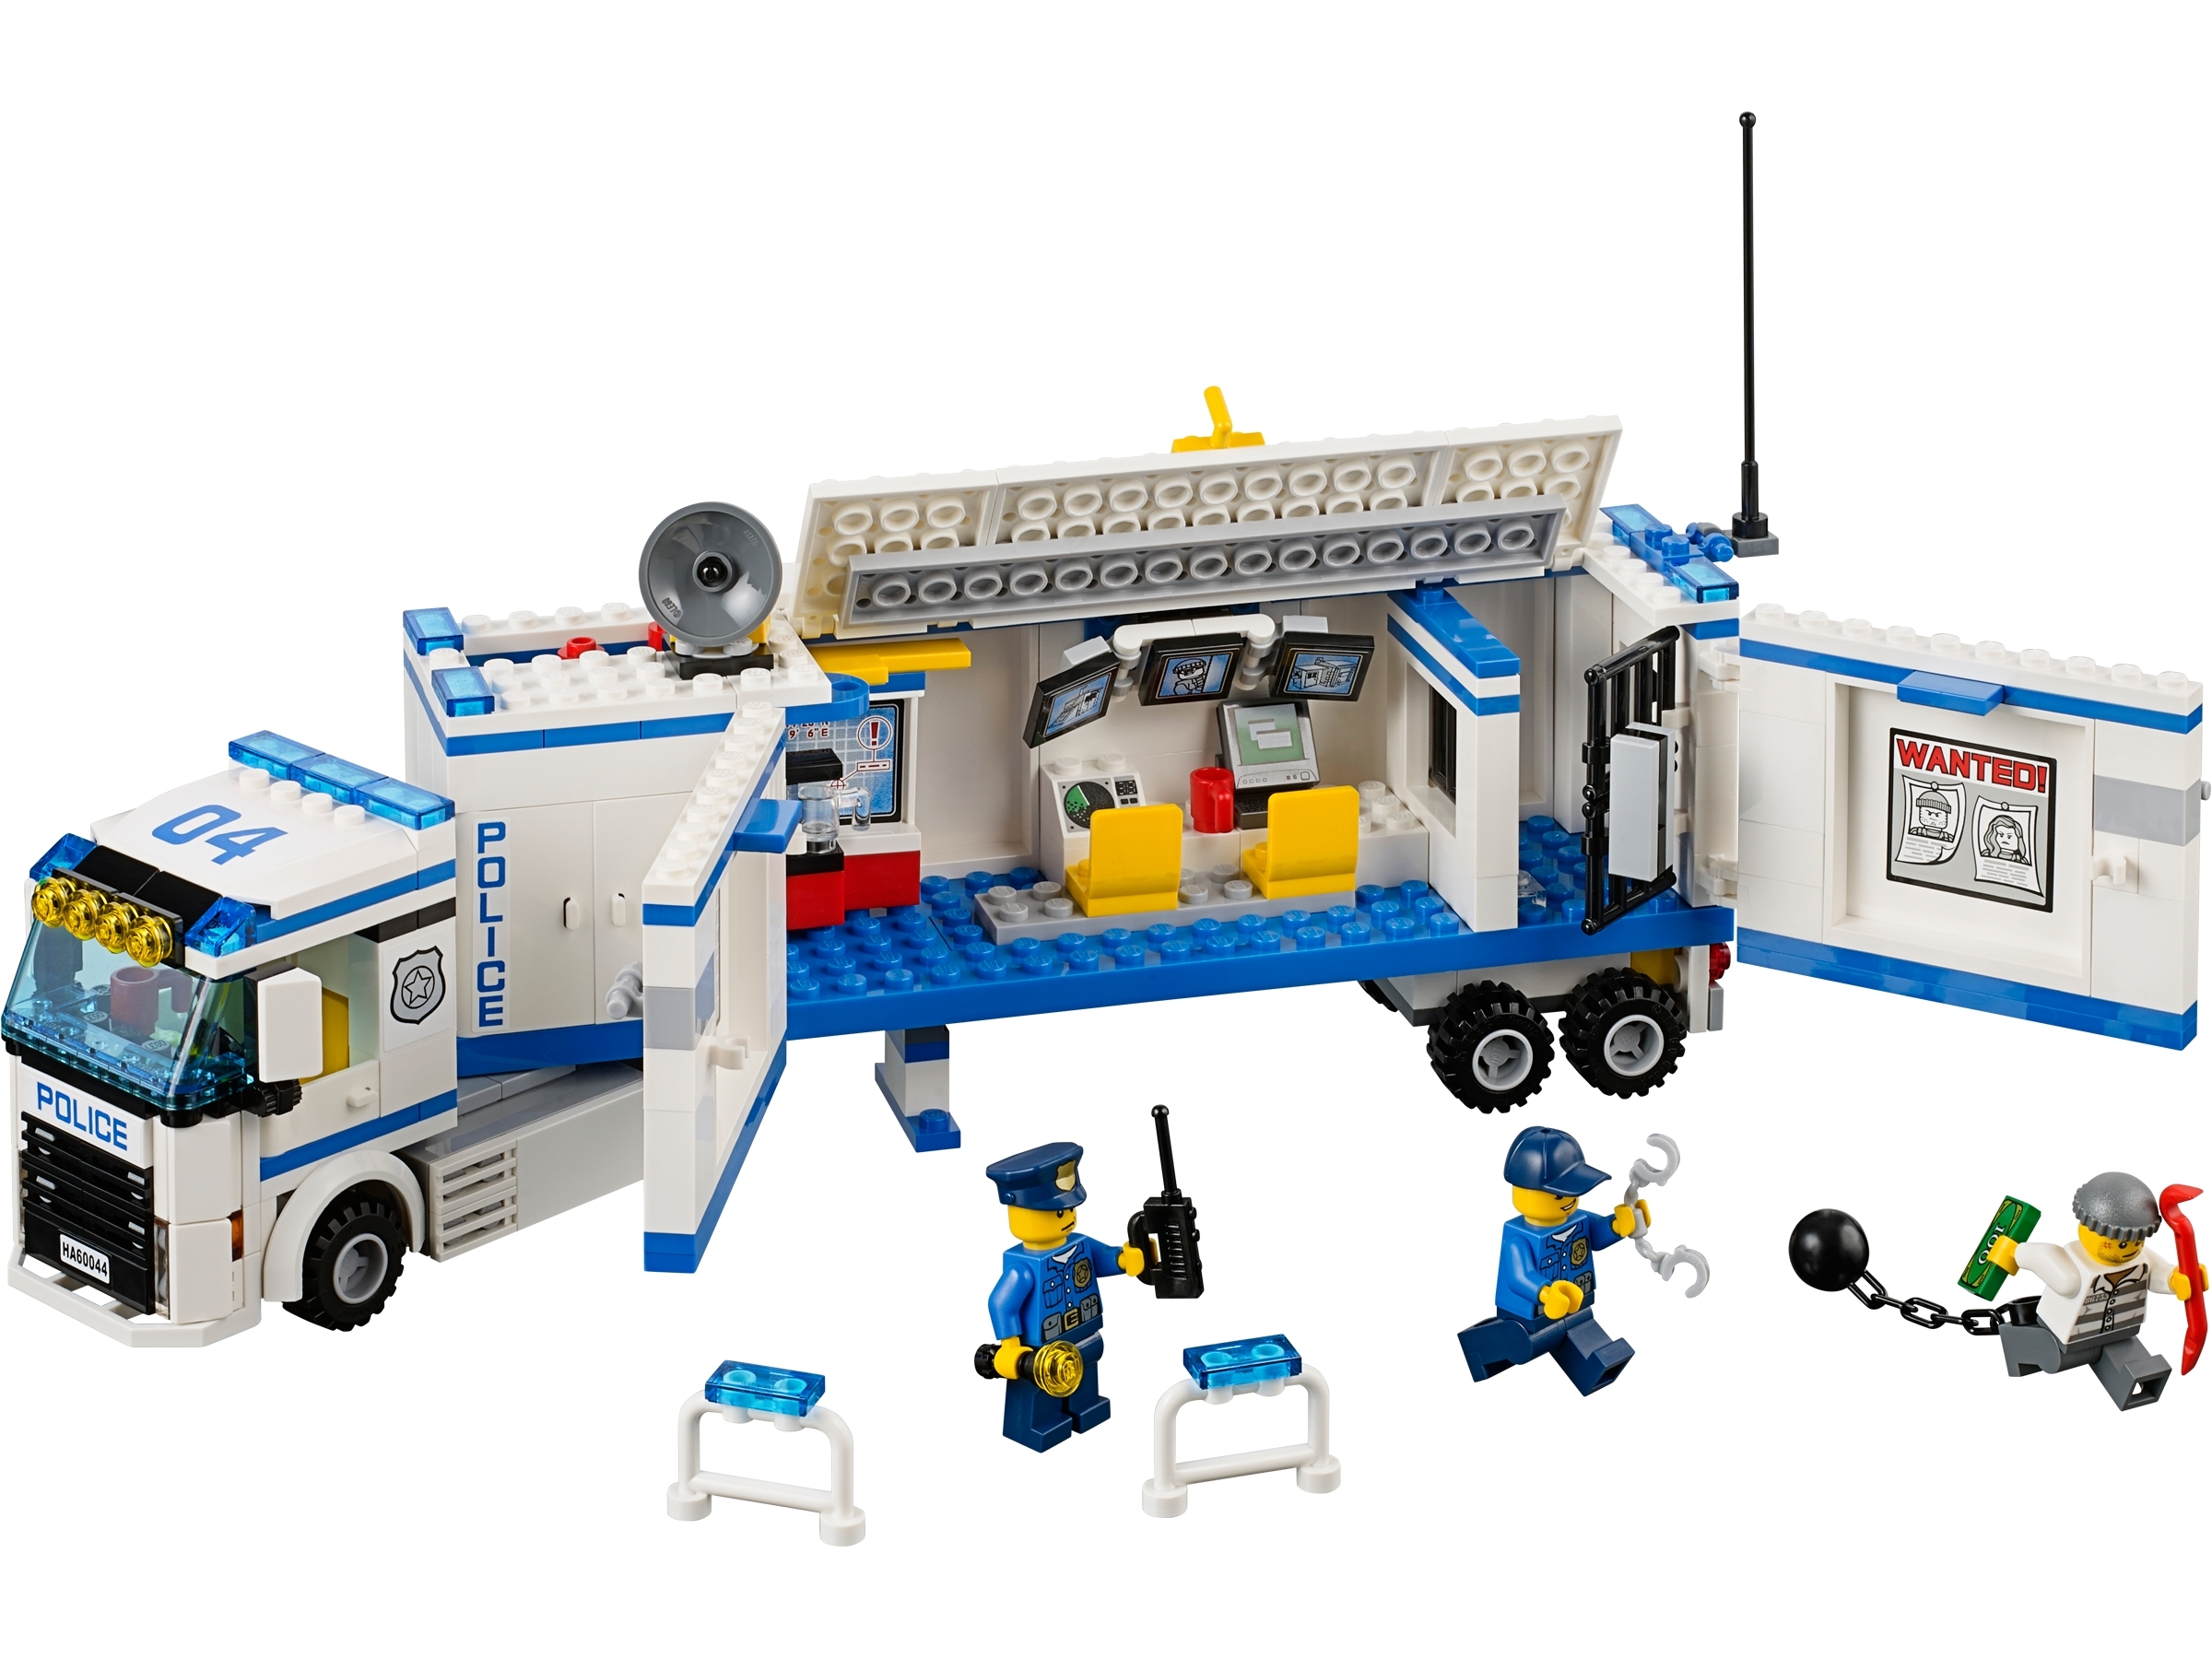 lego police lorry instructions